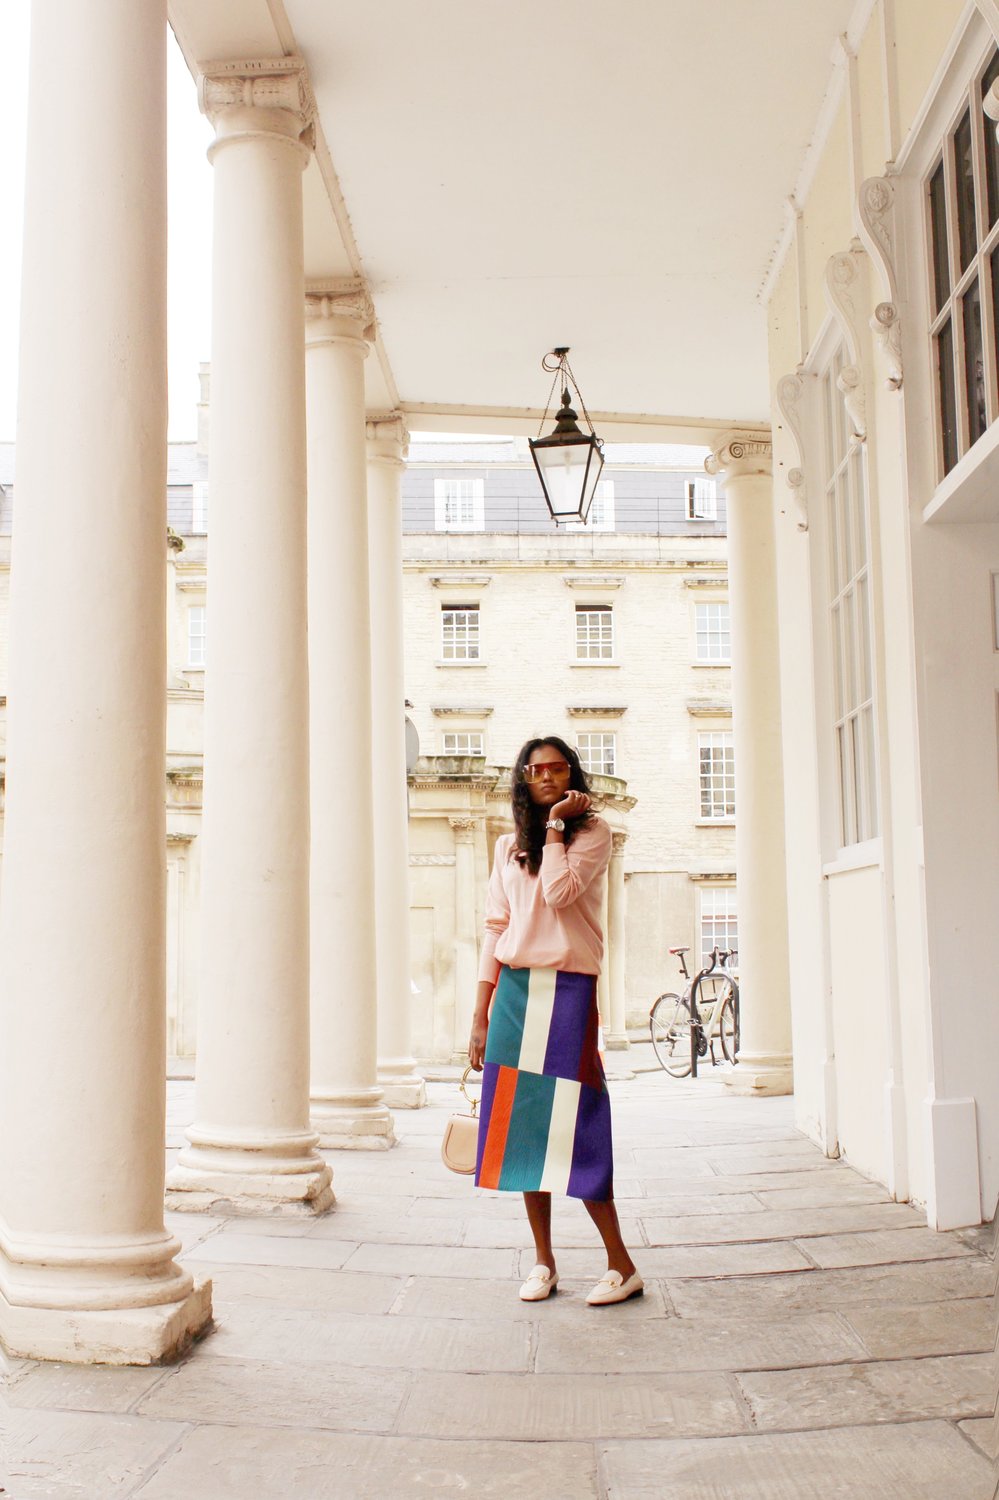 Sachini wearing sunglasses, a pink top and a colour blocked skirt holding a Chloé bag